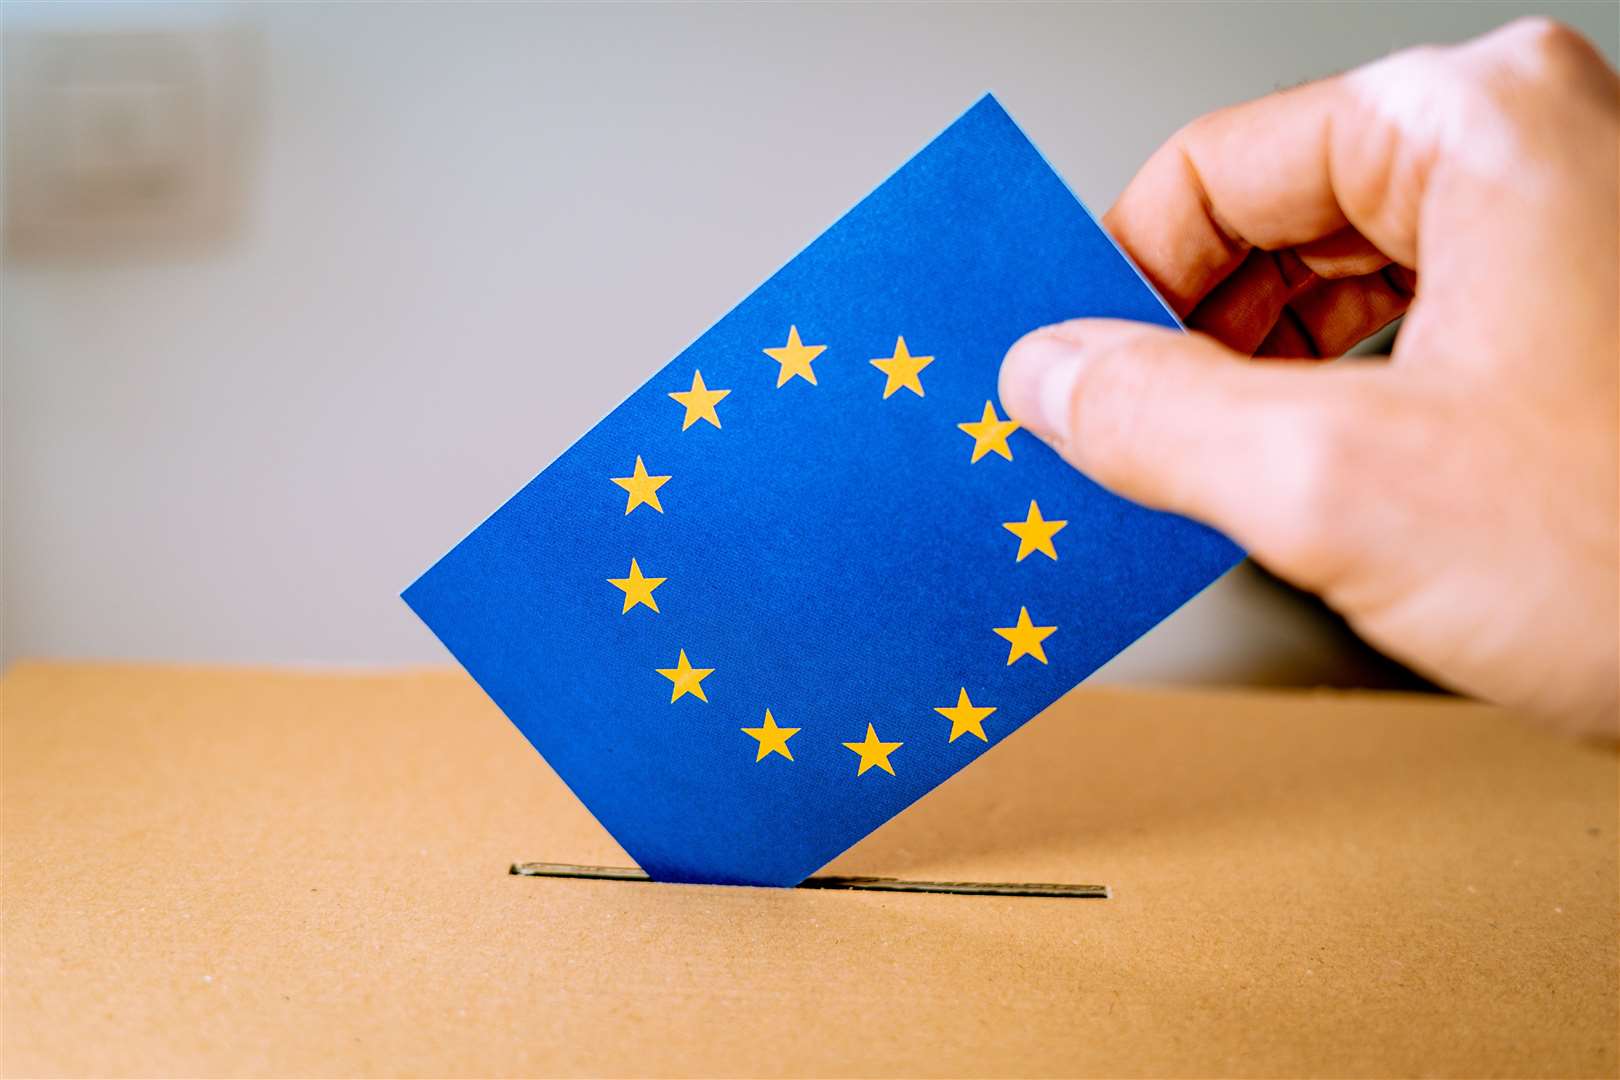 The European Parliament elections take place on May 23.